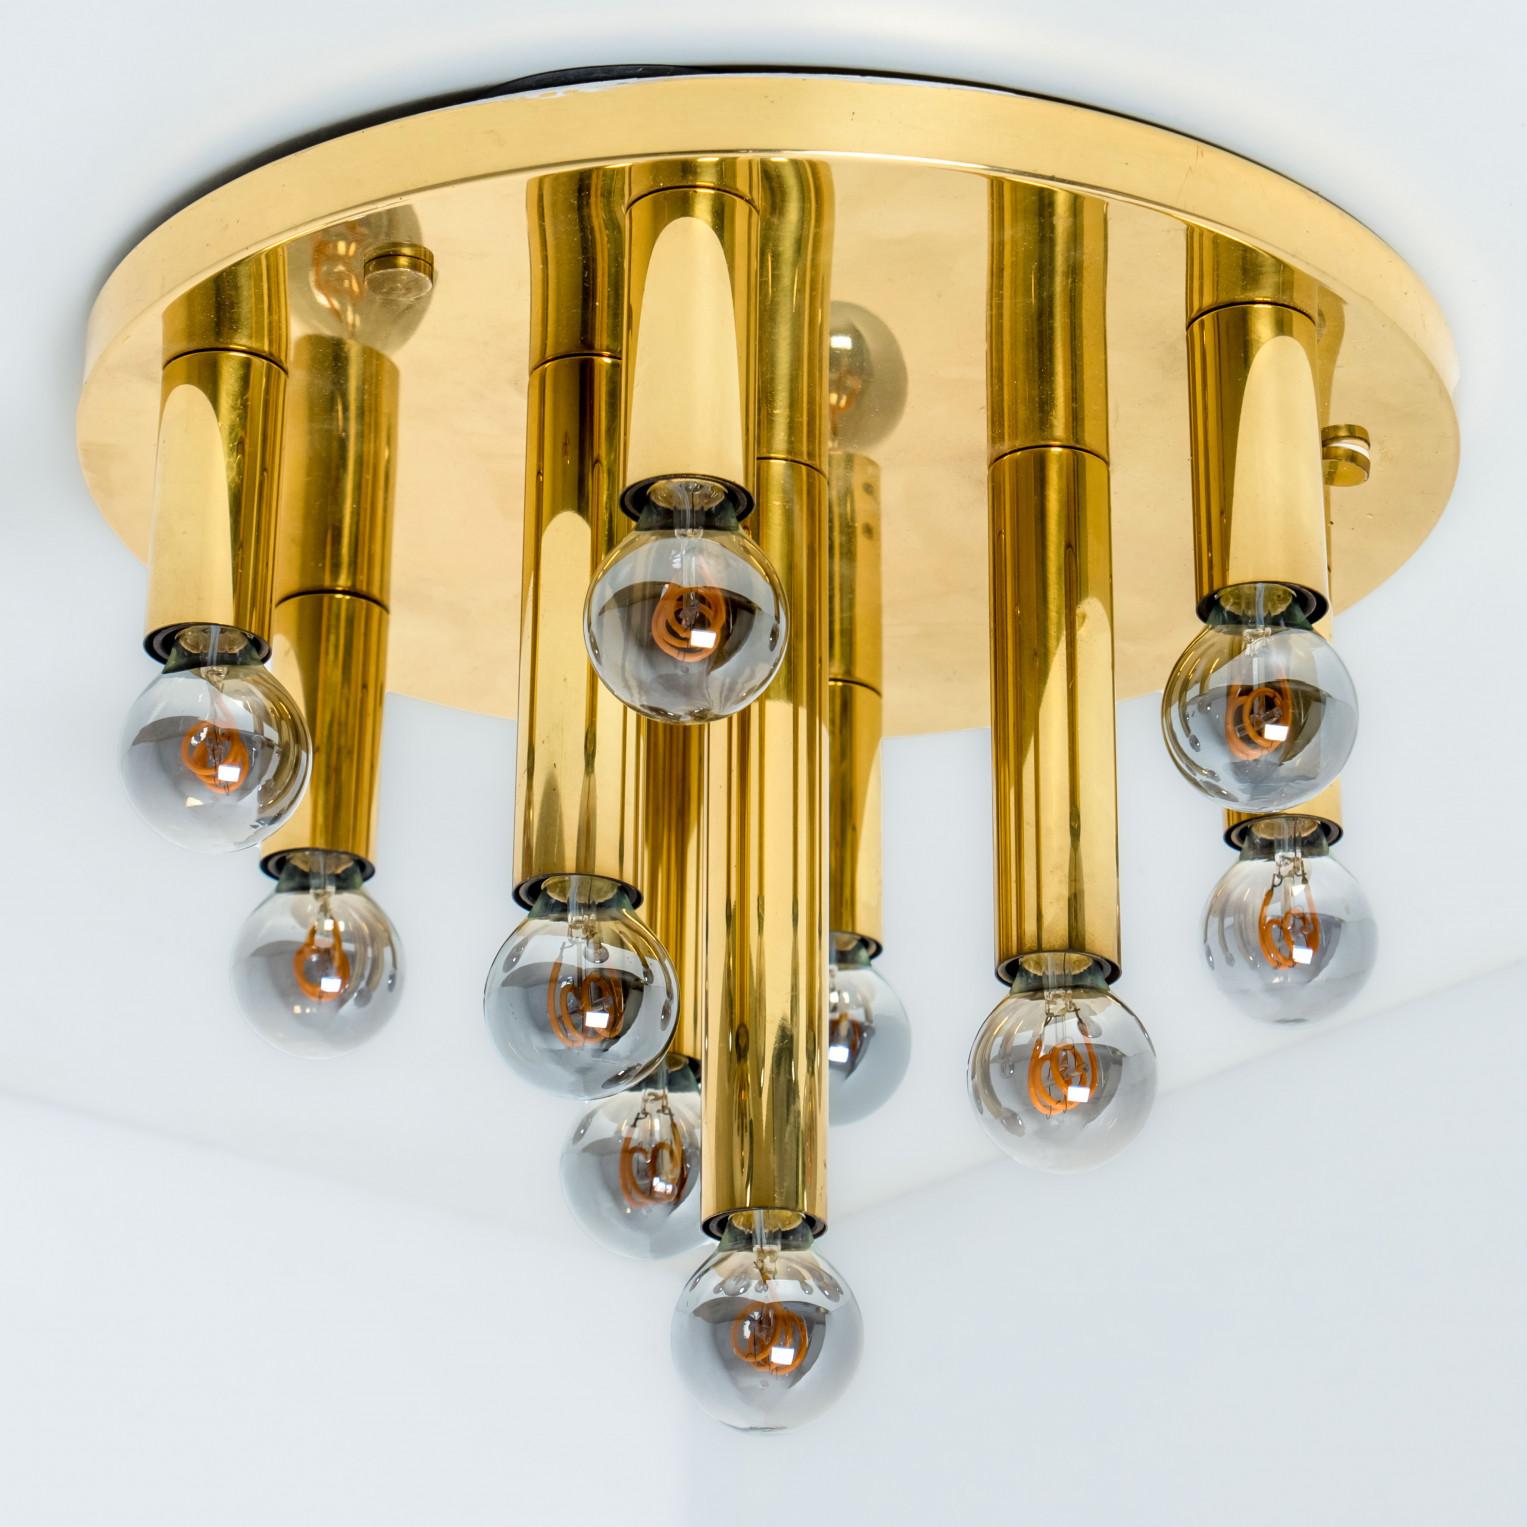 Beautiful brass Flush Mount by Cosack lights, Germany, 1960/1970.

Original 1960s space age brass ceiling light with nine lighting elements. This light was designed and produced by Cosack Lights, one of the premium light producer is the 1960s and